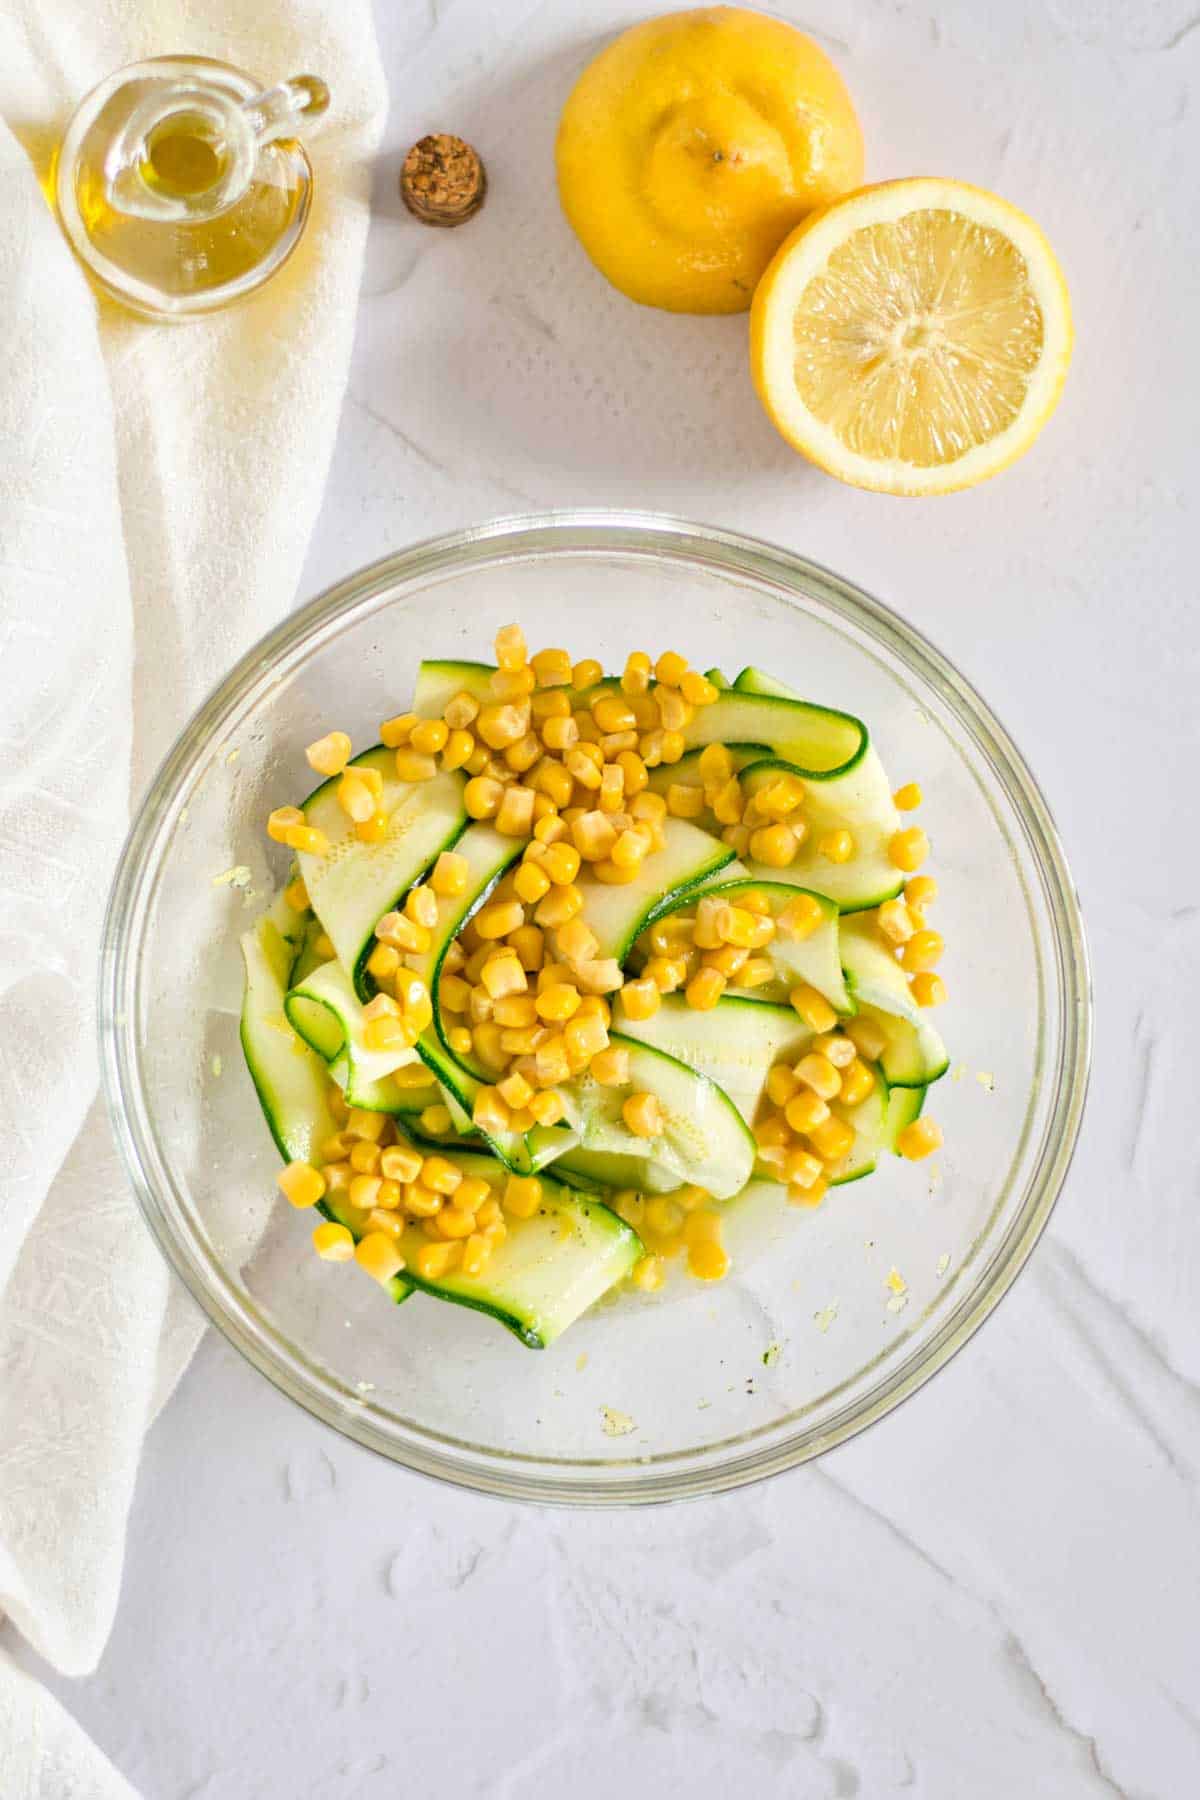 A bowl of zucchini ribbons and corn salad with lemon and a bottle of olive oil on a white surface.